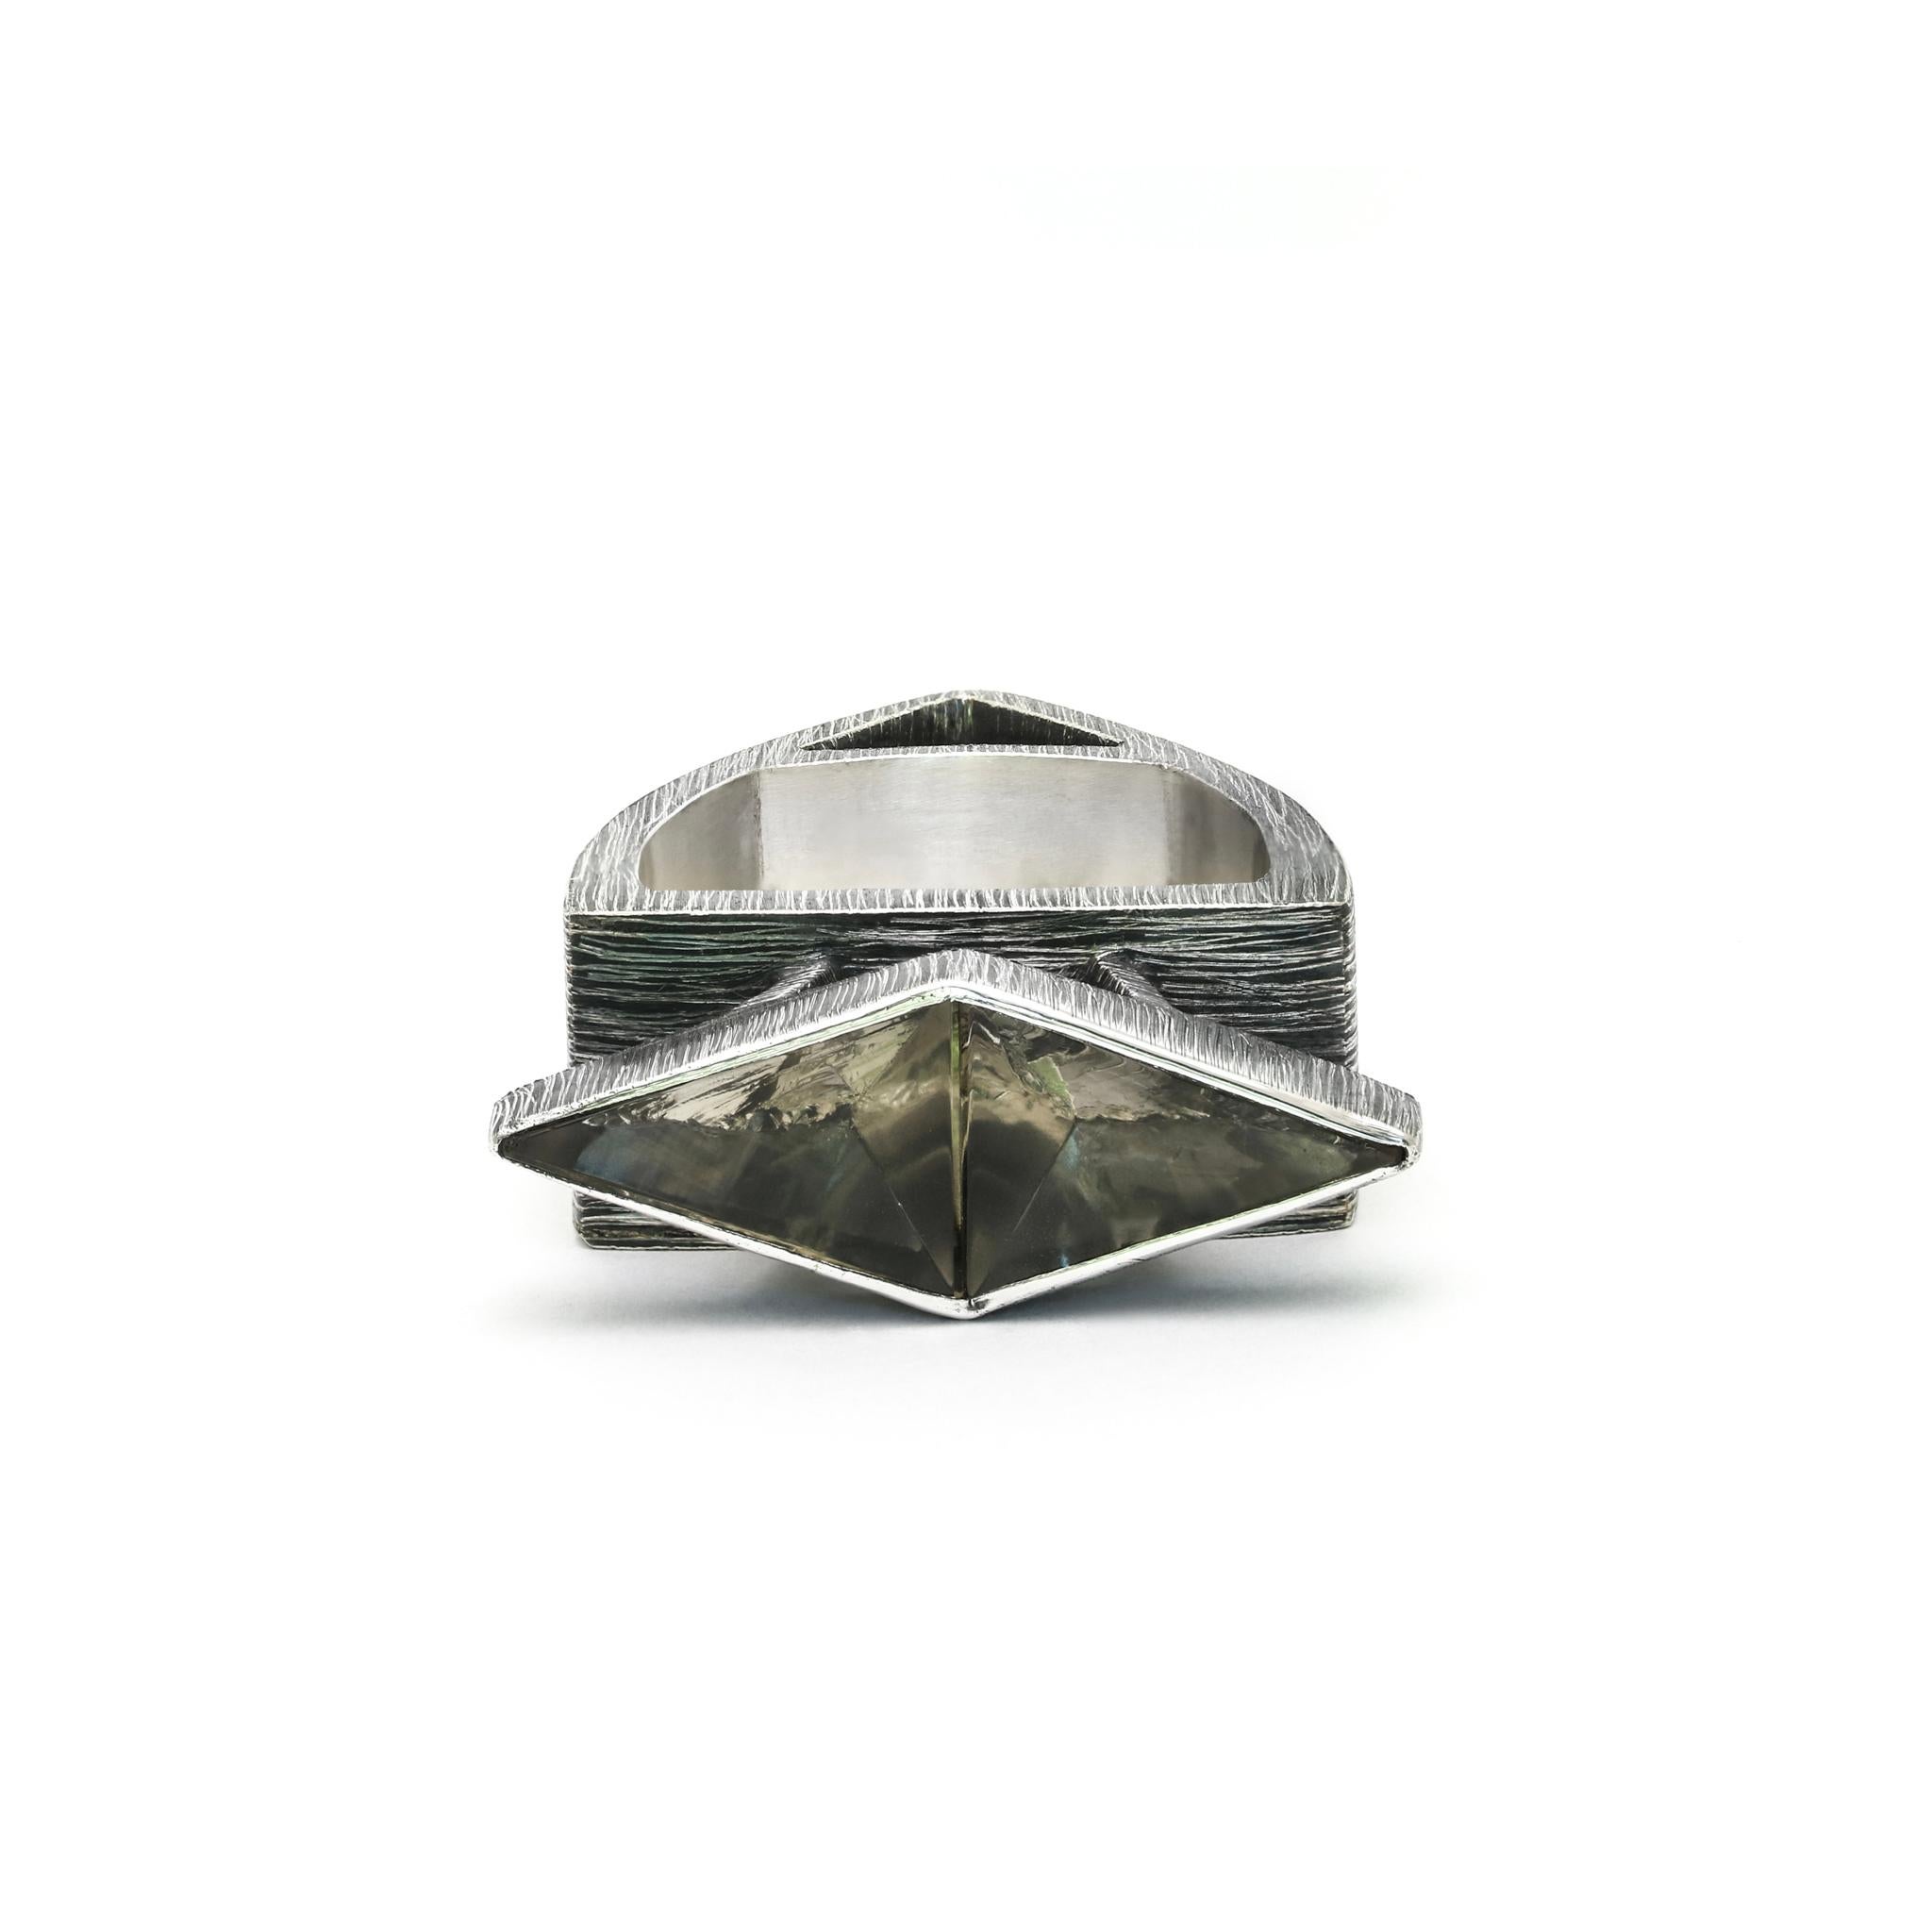 Balinese Dual Triangles Ring Crafted from Sterling Silver & Hewn Crystals